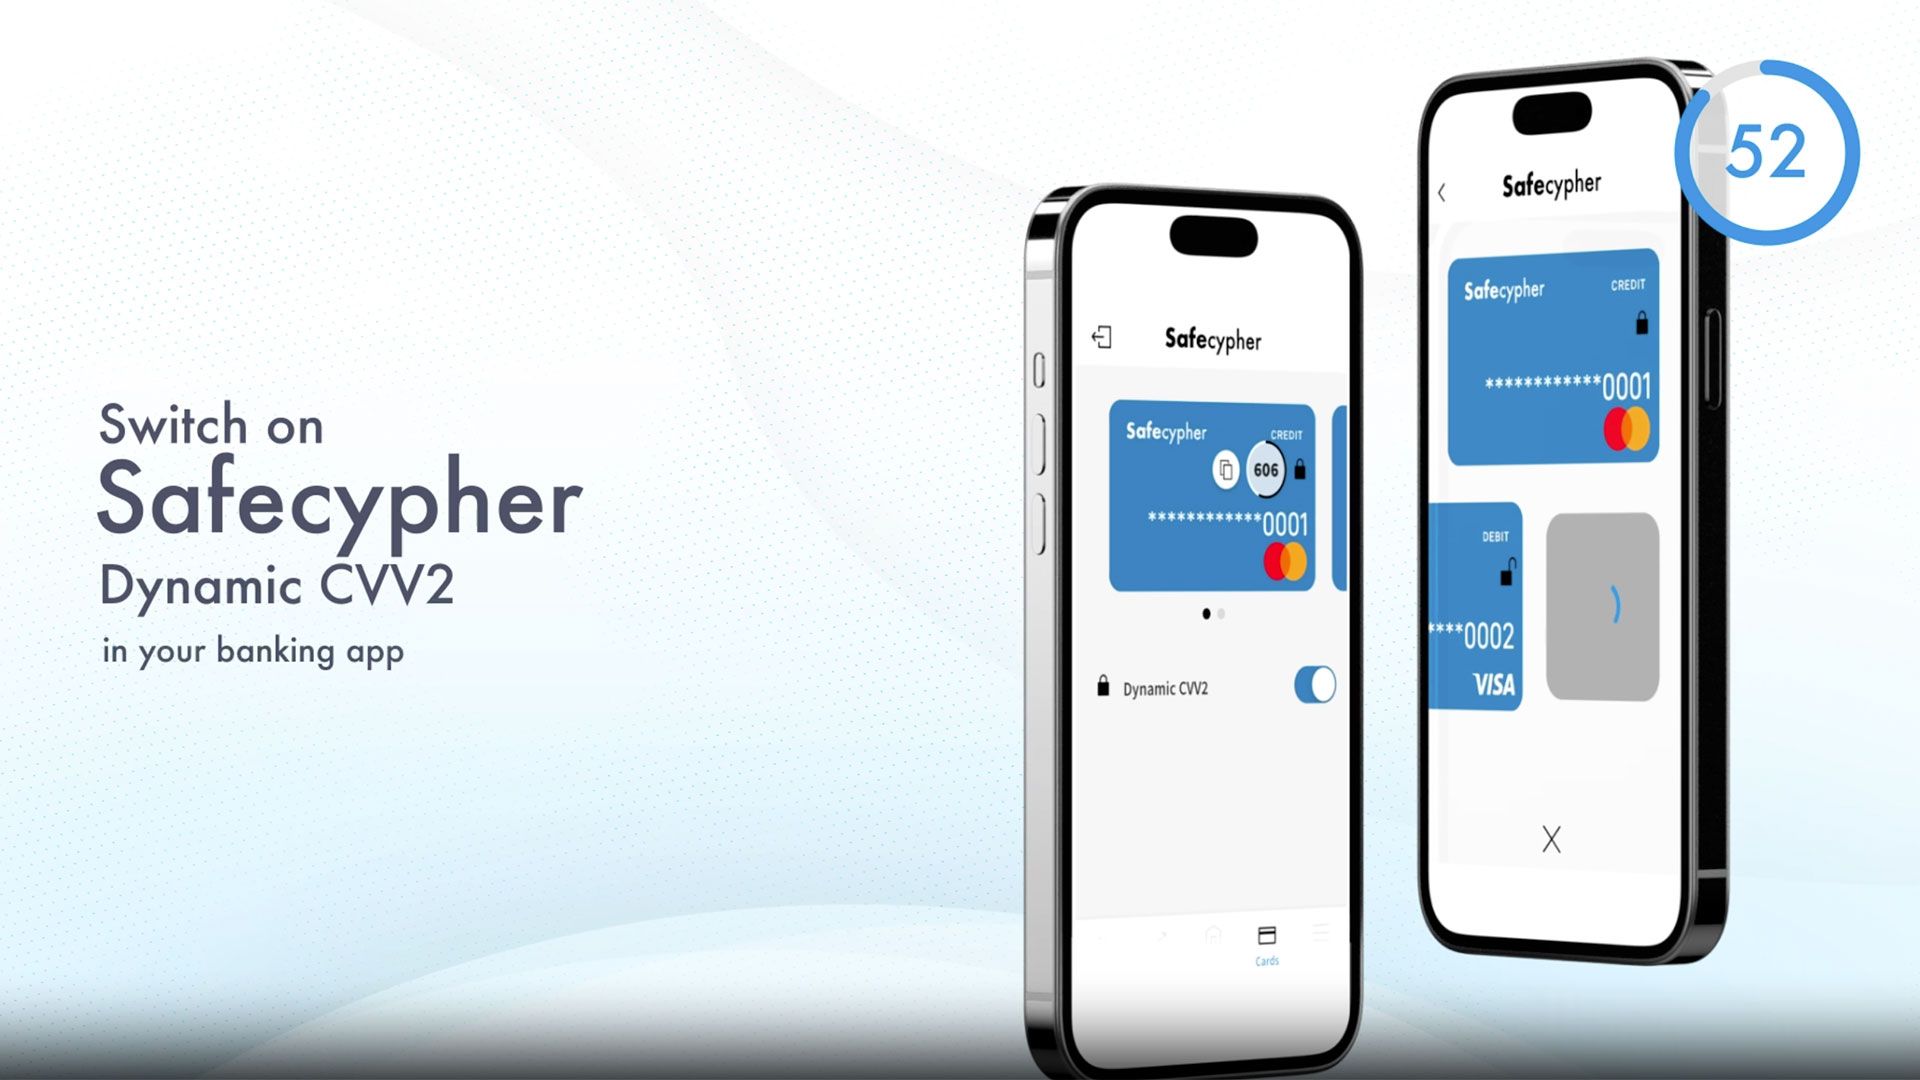 Switch on Safecypher Dynamic CVV2 in your banking app